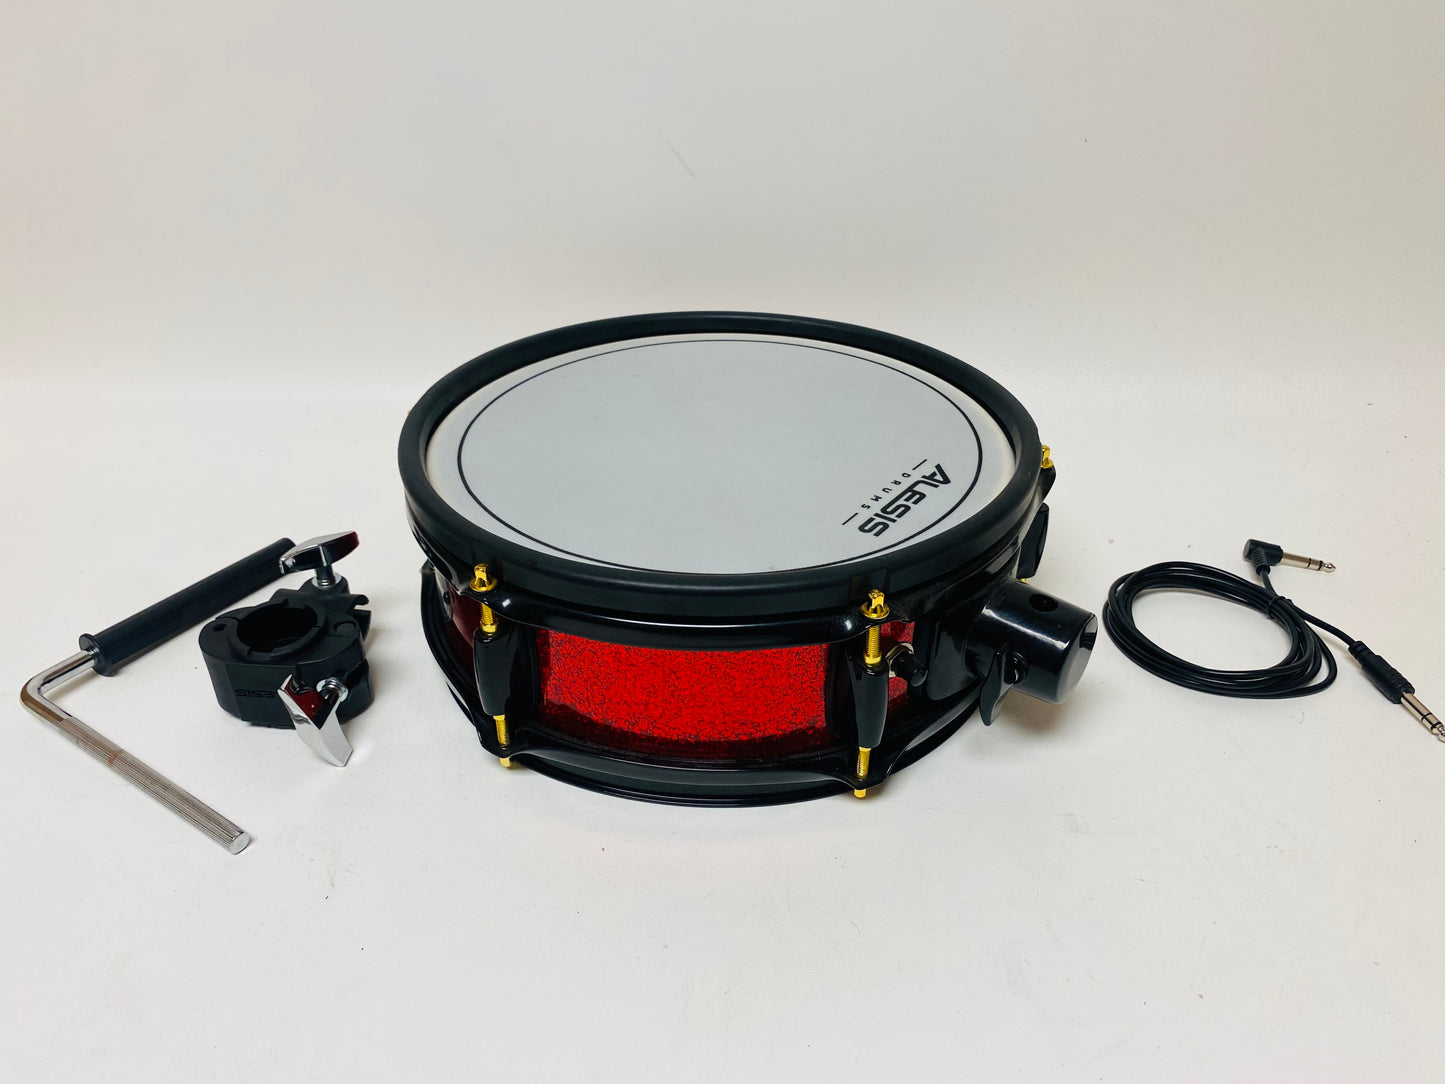 Alesis Strike Pro SE 12” Mesh Drum Tom Pad with Mount and Cable